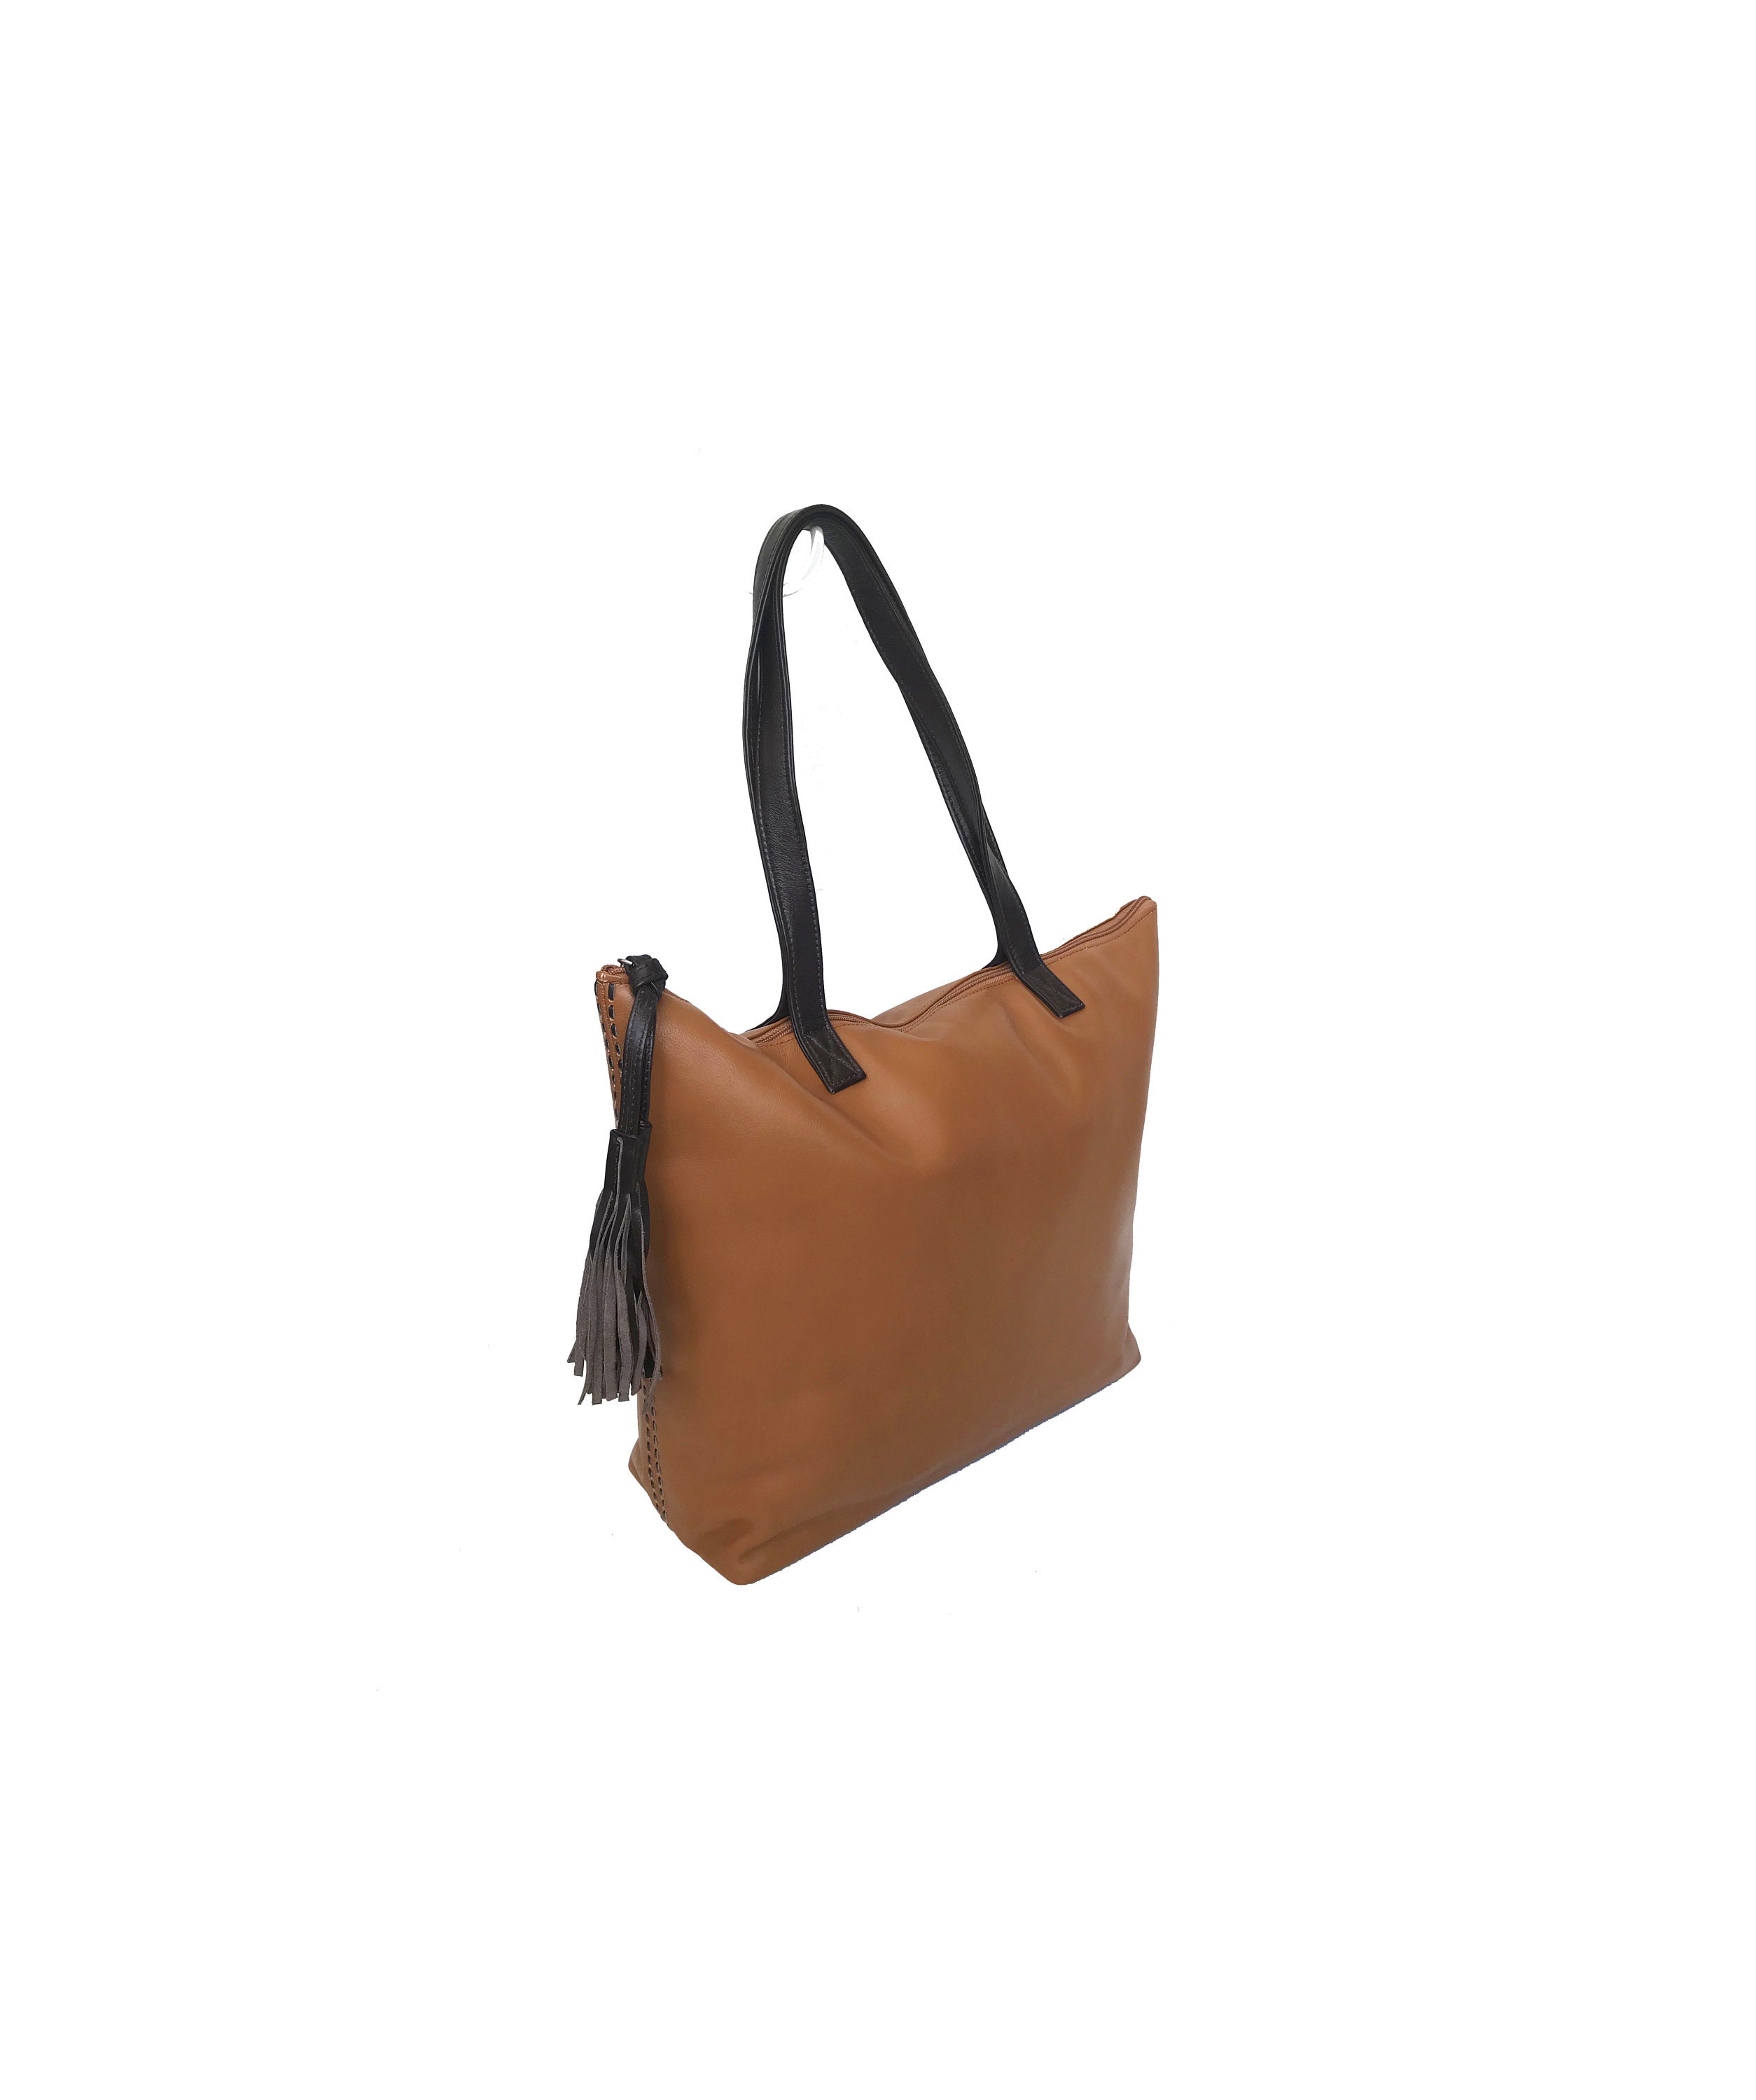 Large Leather Tote Bag with Tassel Totes Leather Bag